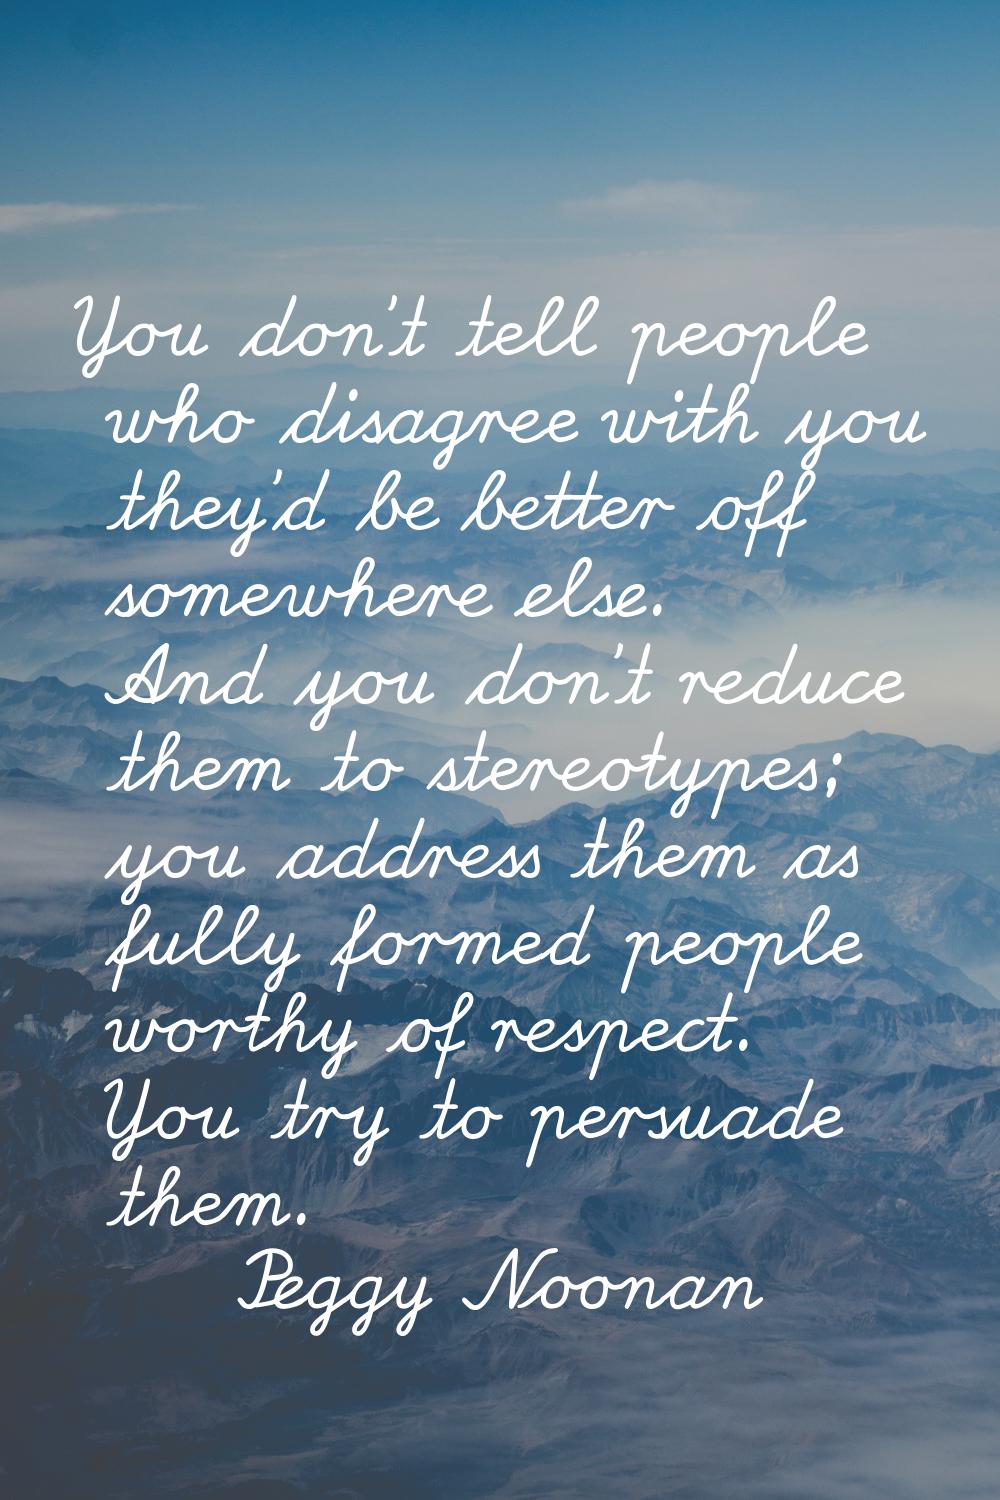 You don't tell people who disagree with you they'd be better off somewhere else. And you don't redu